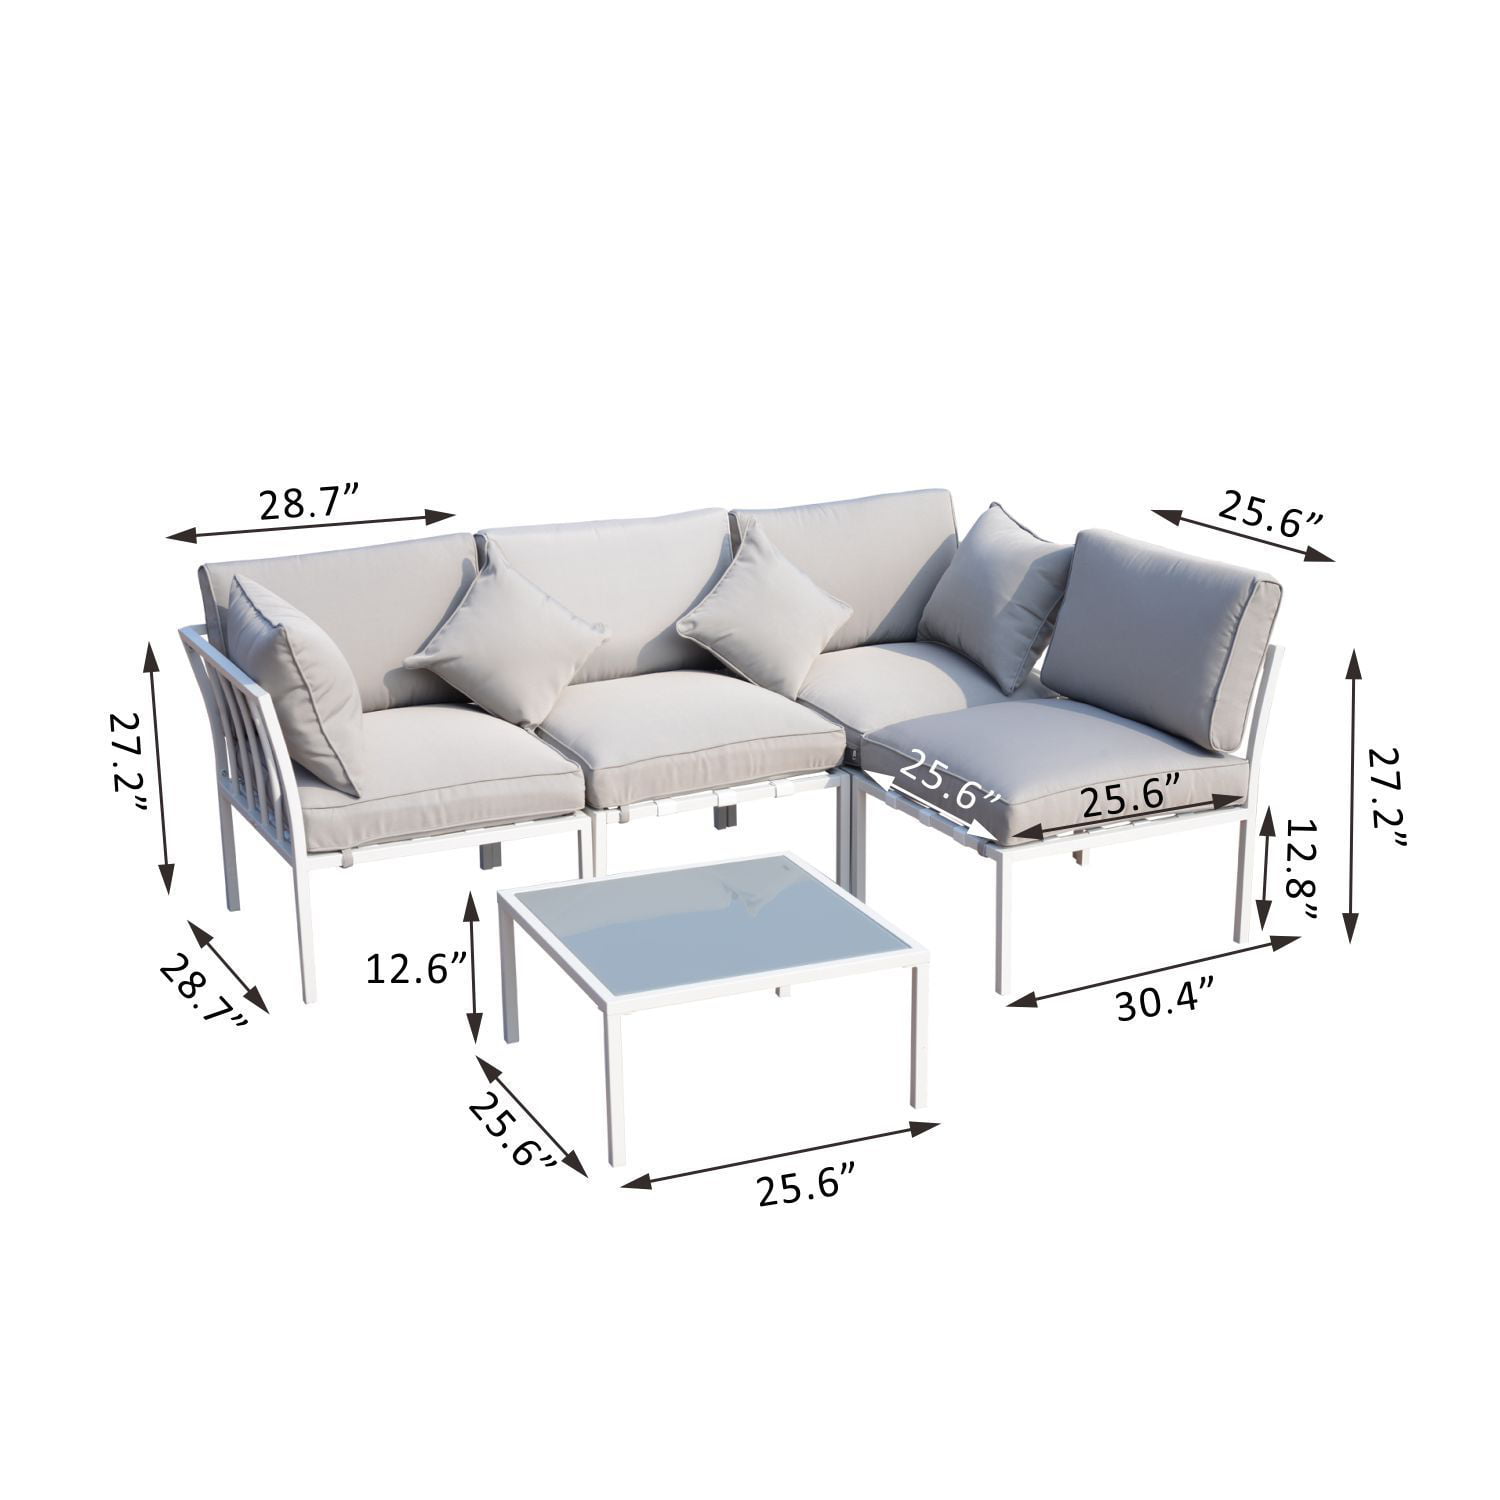 Outsunny 4-Piece Outdoor Furniture Patio Conversation Seating Set with a Loveseat, 2 Sofa Chairs, and Coffee White - Walmart.com